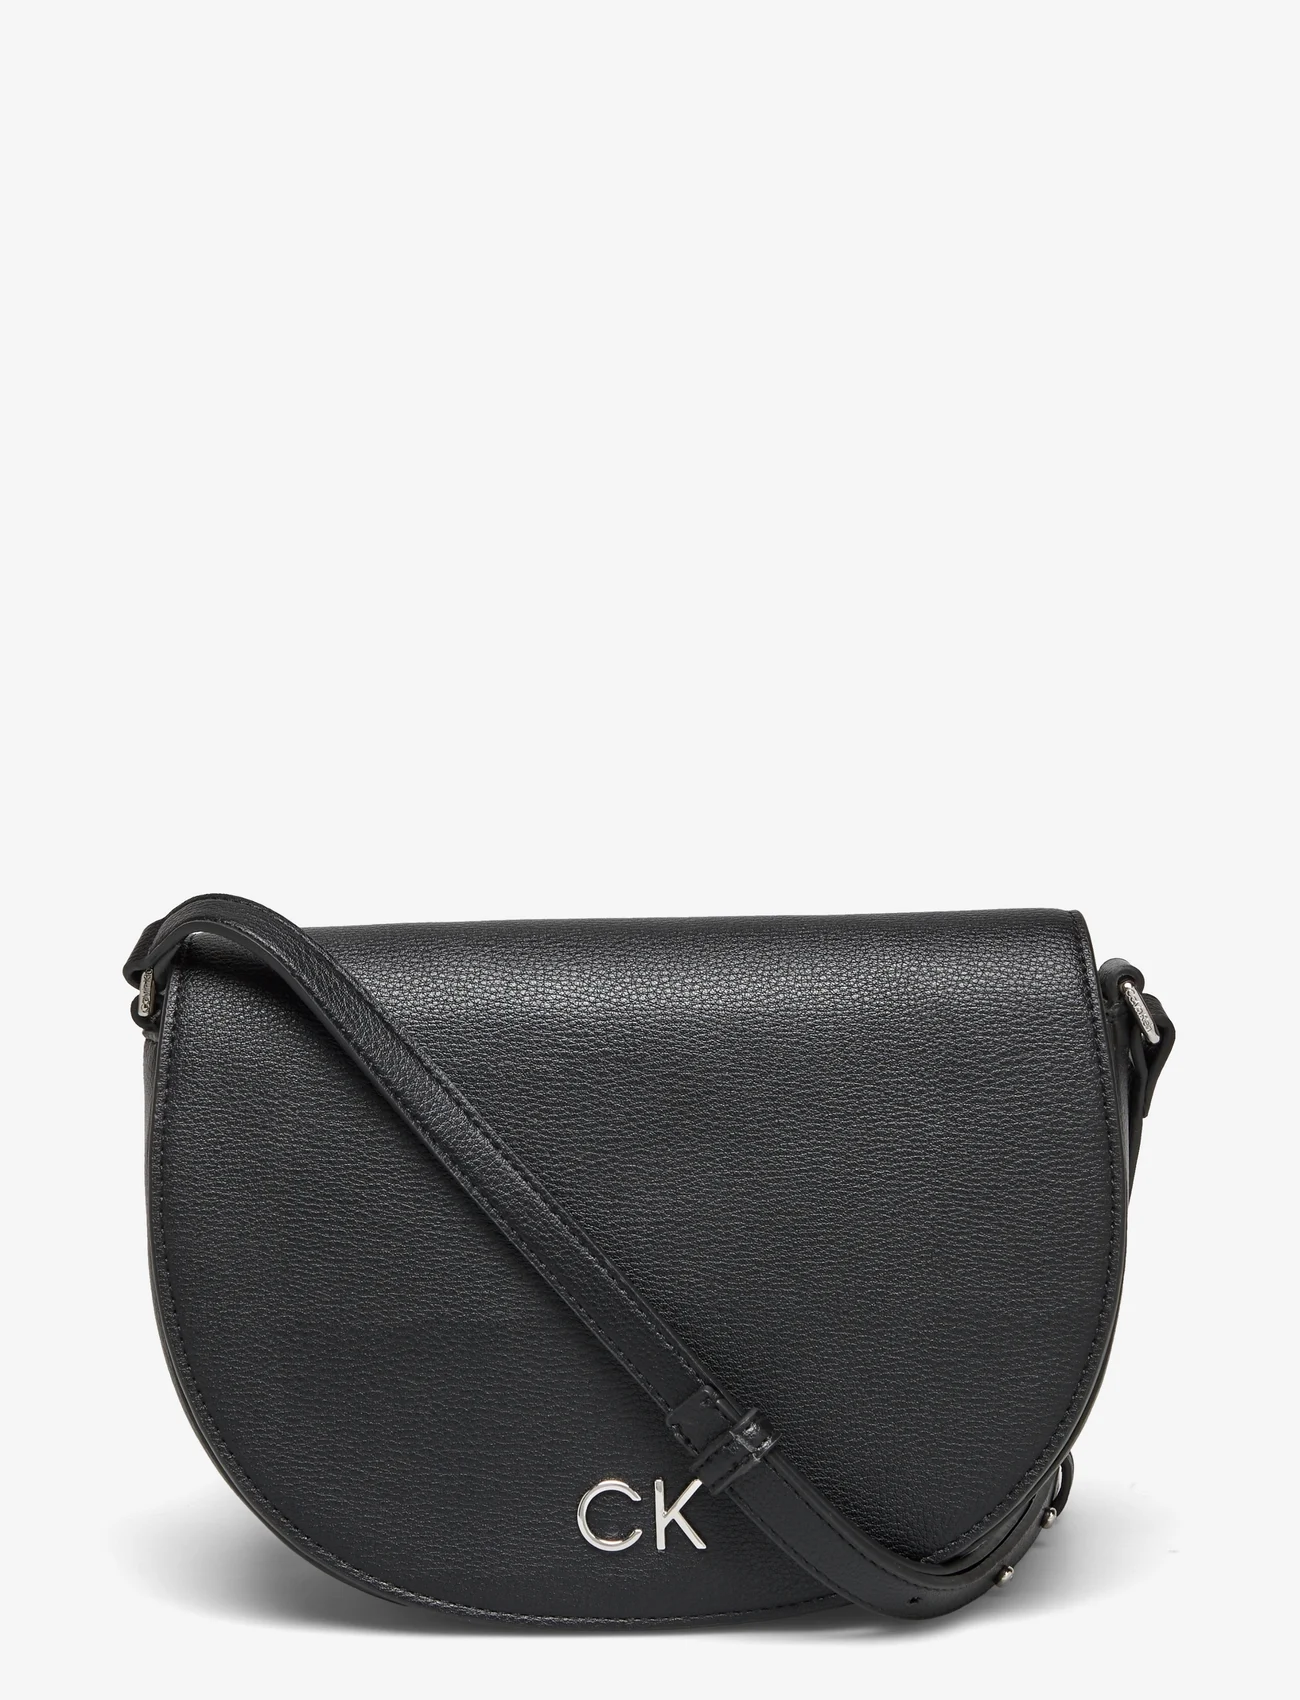 Calvin Klein - CK DAILY SADDLE BAG PEBBLE - party wear at outlet prices - ck black - 0